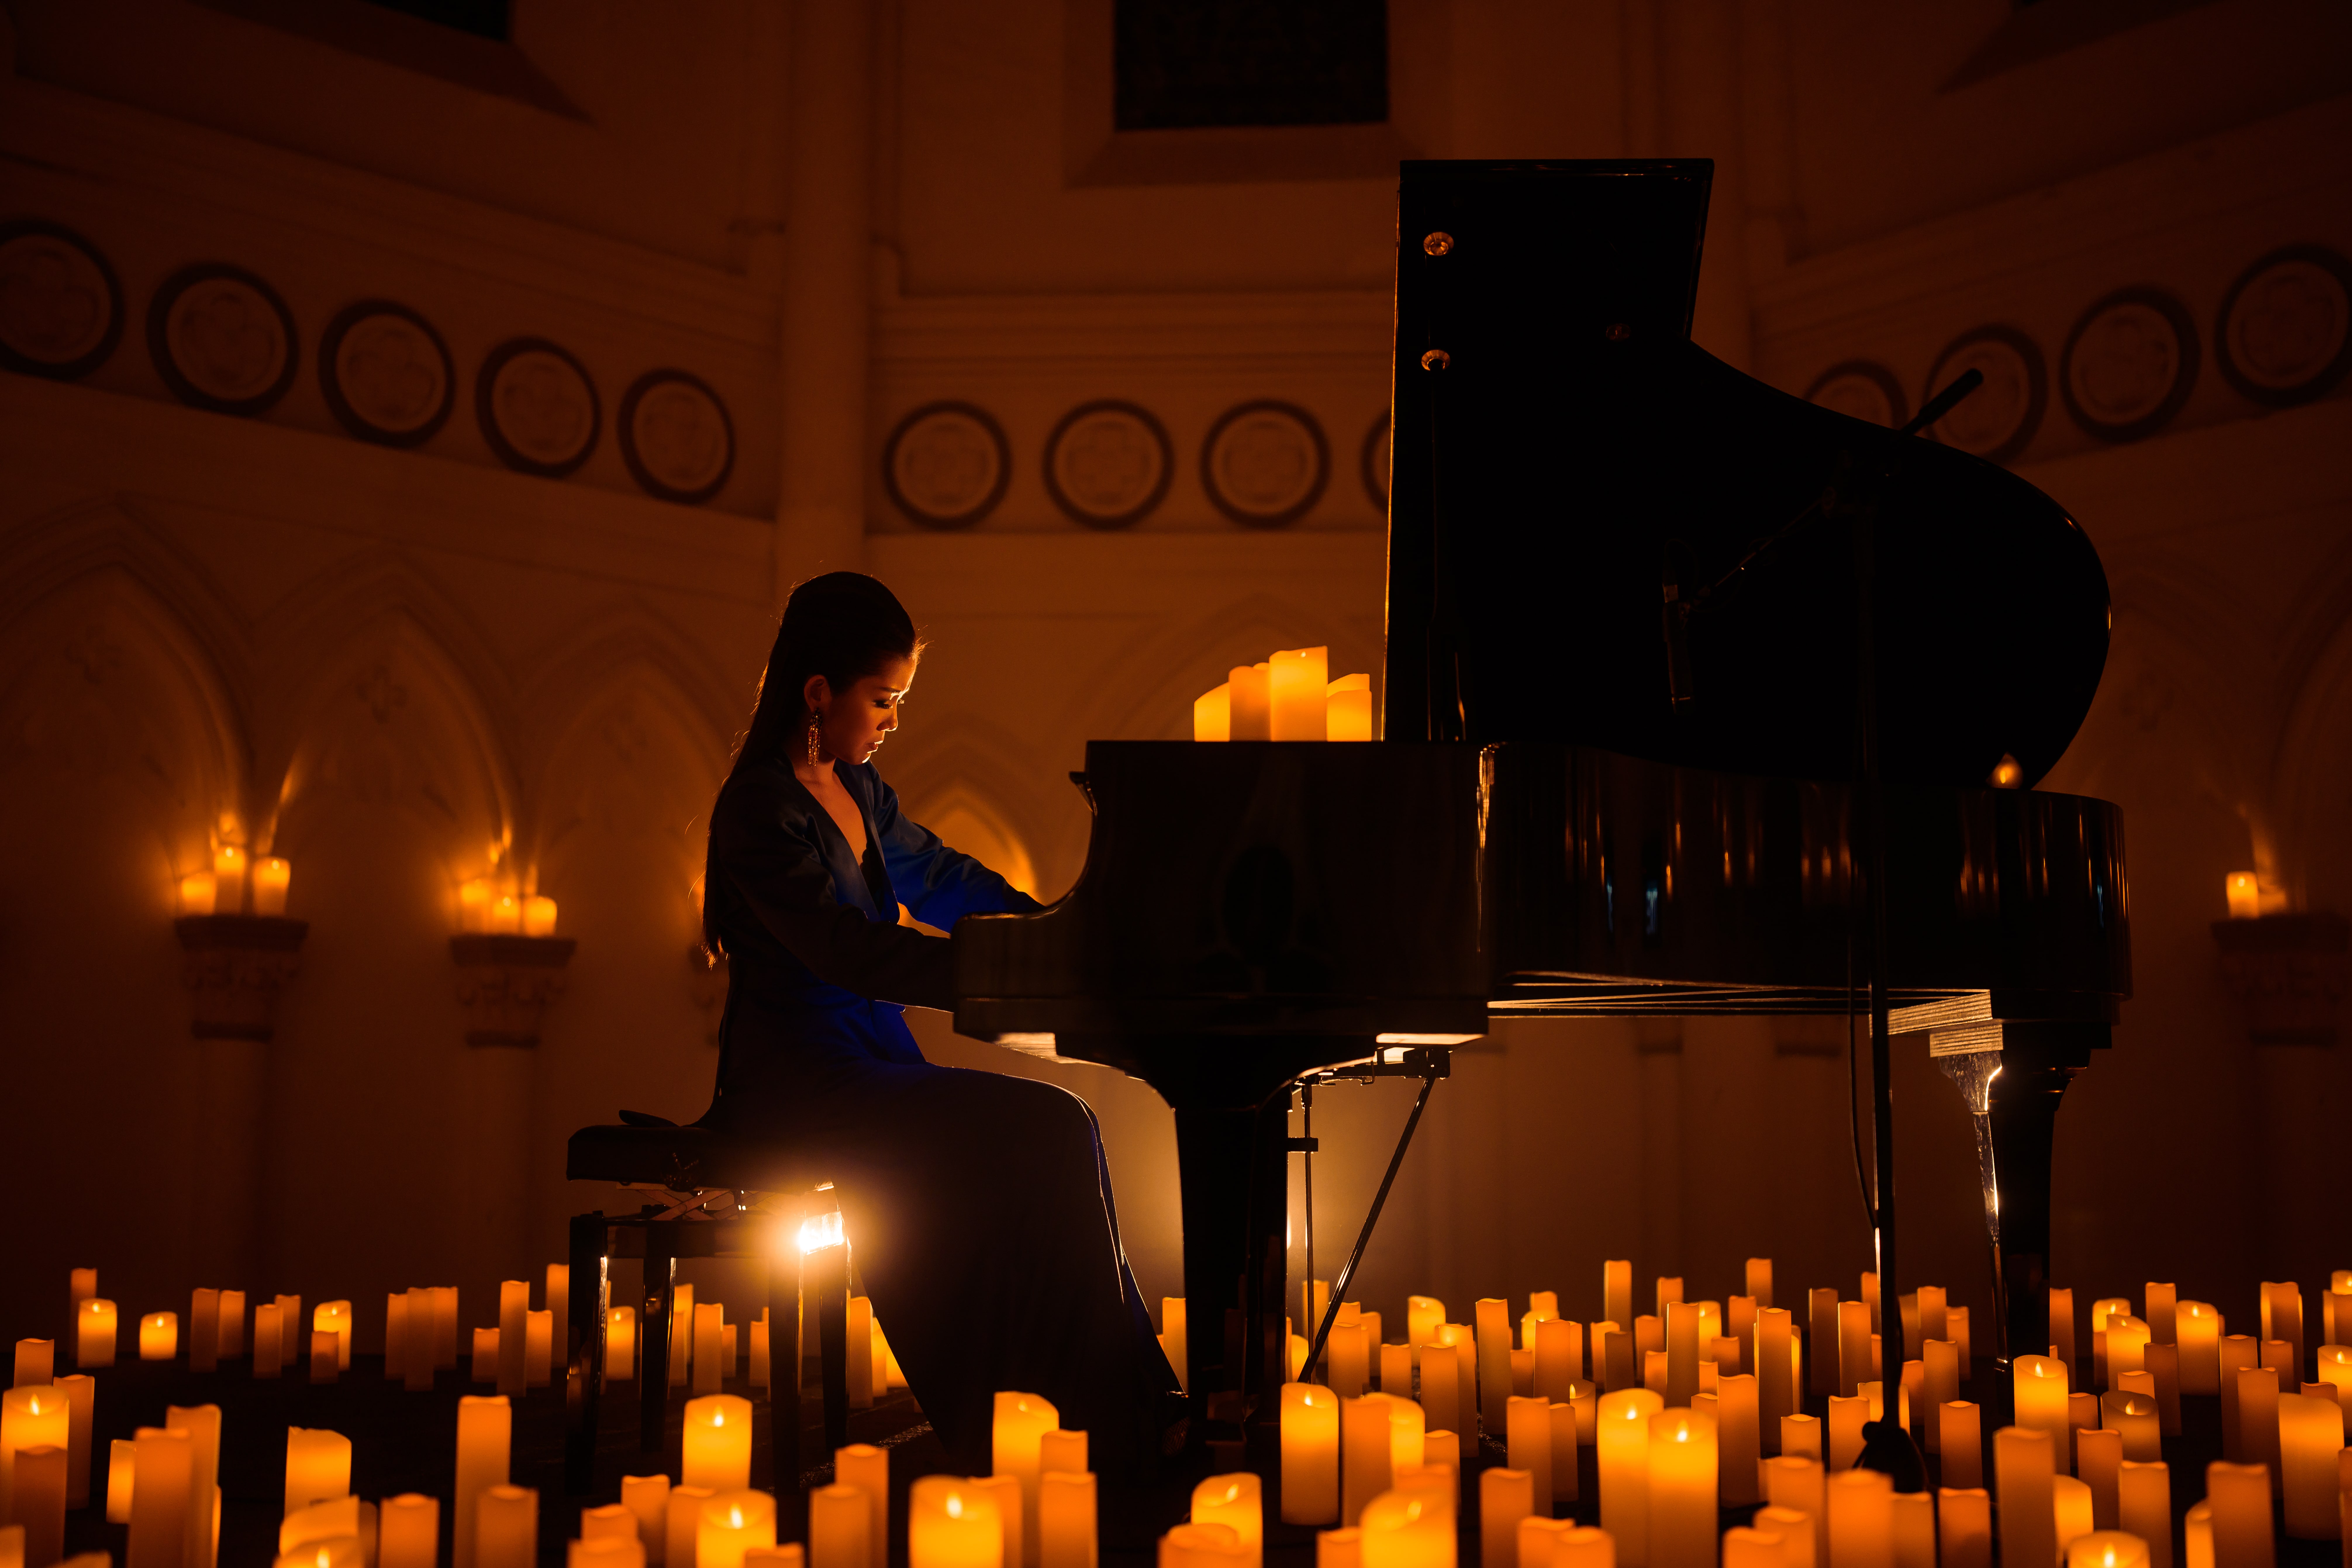 pianist performing surrounded by candles, as seen from the side